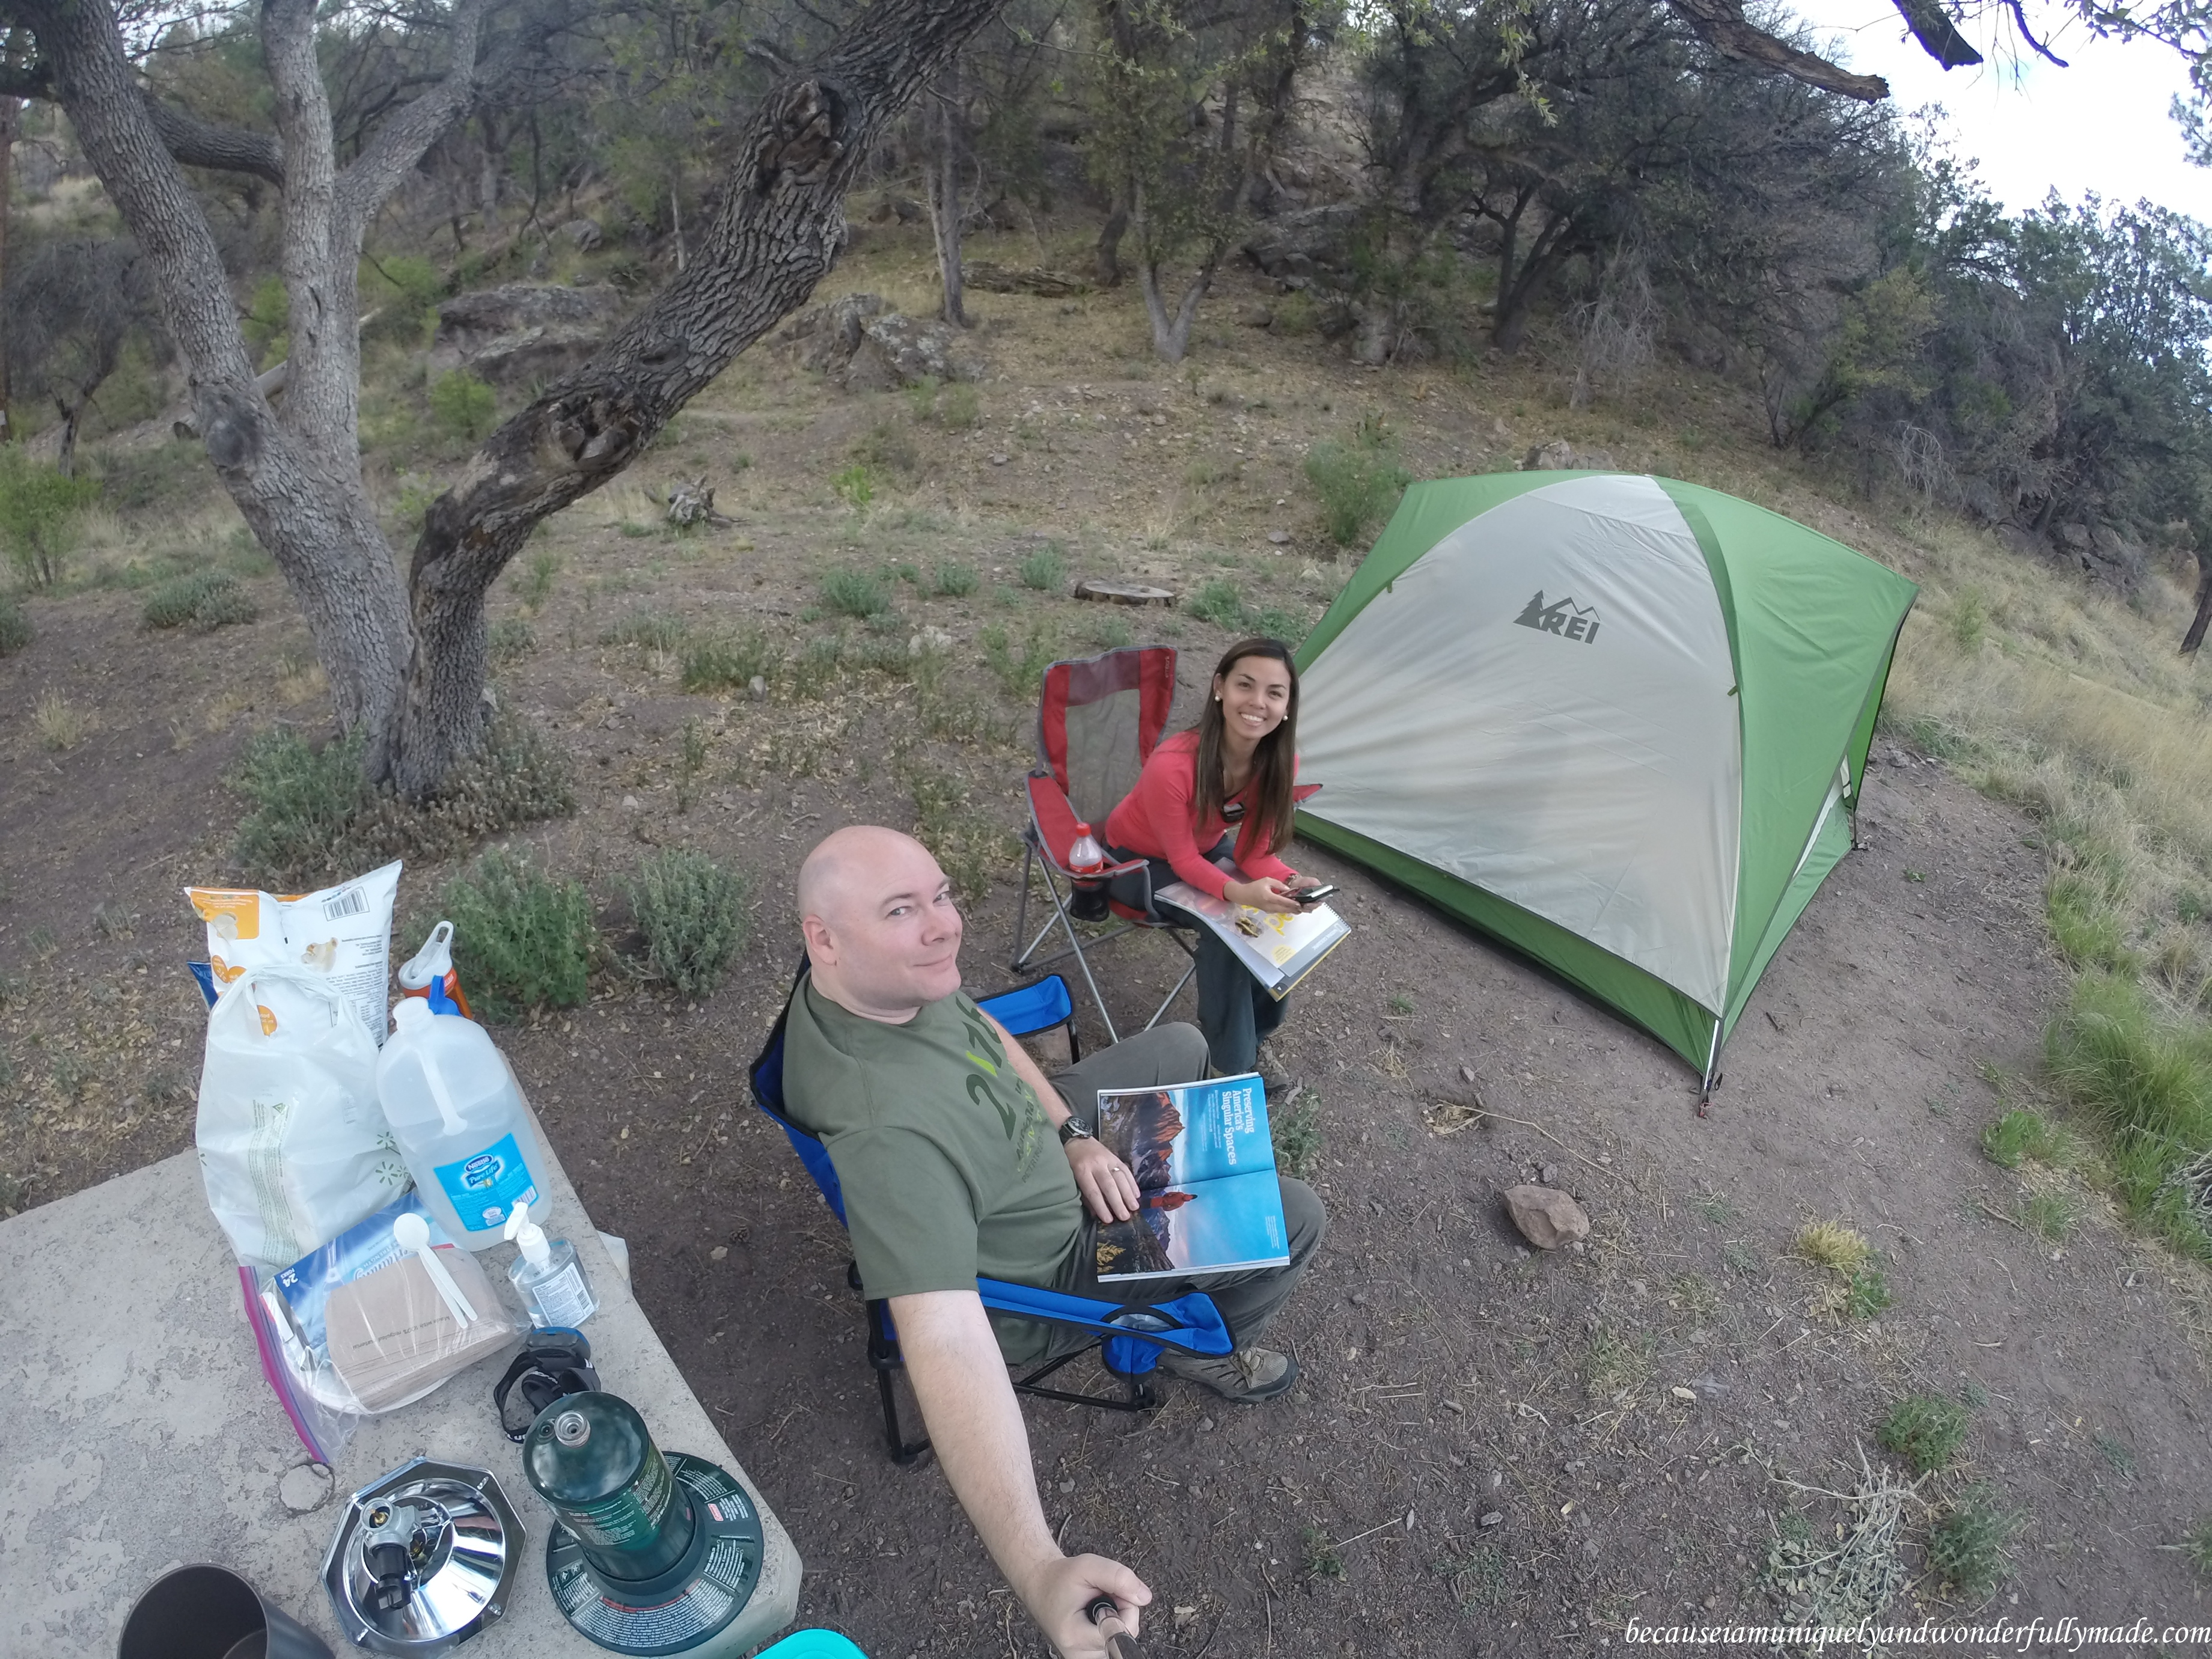 My husband and I's first camping experience in the United States at Gila National Forest in New Mexico.